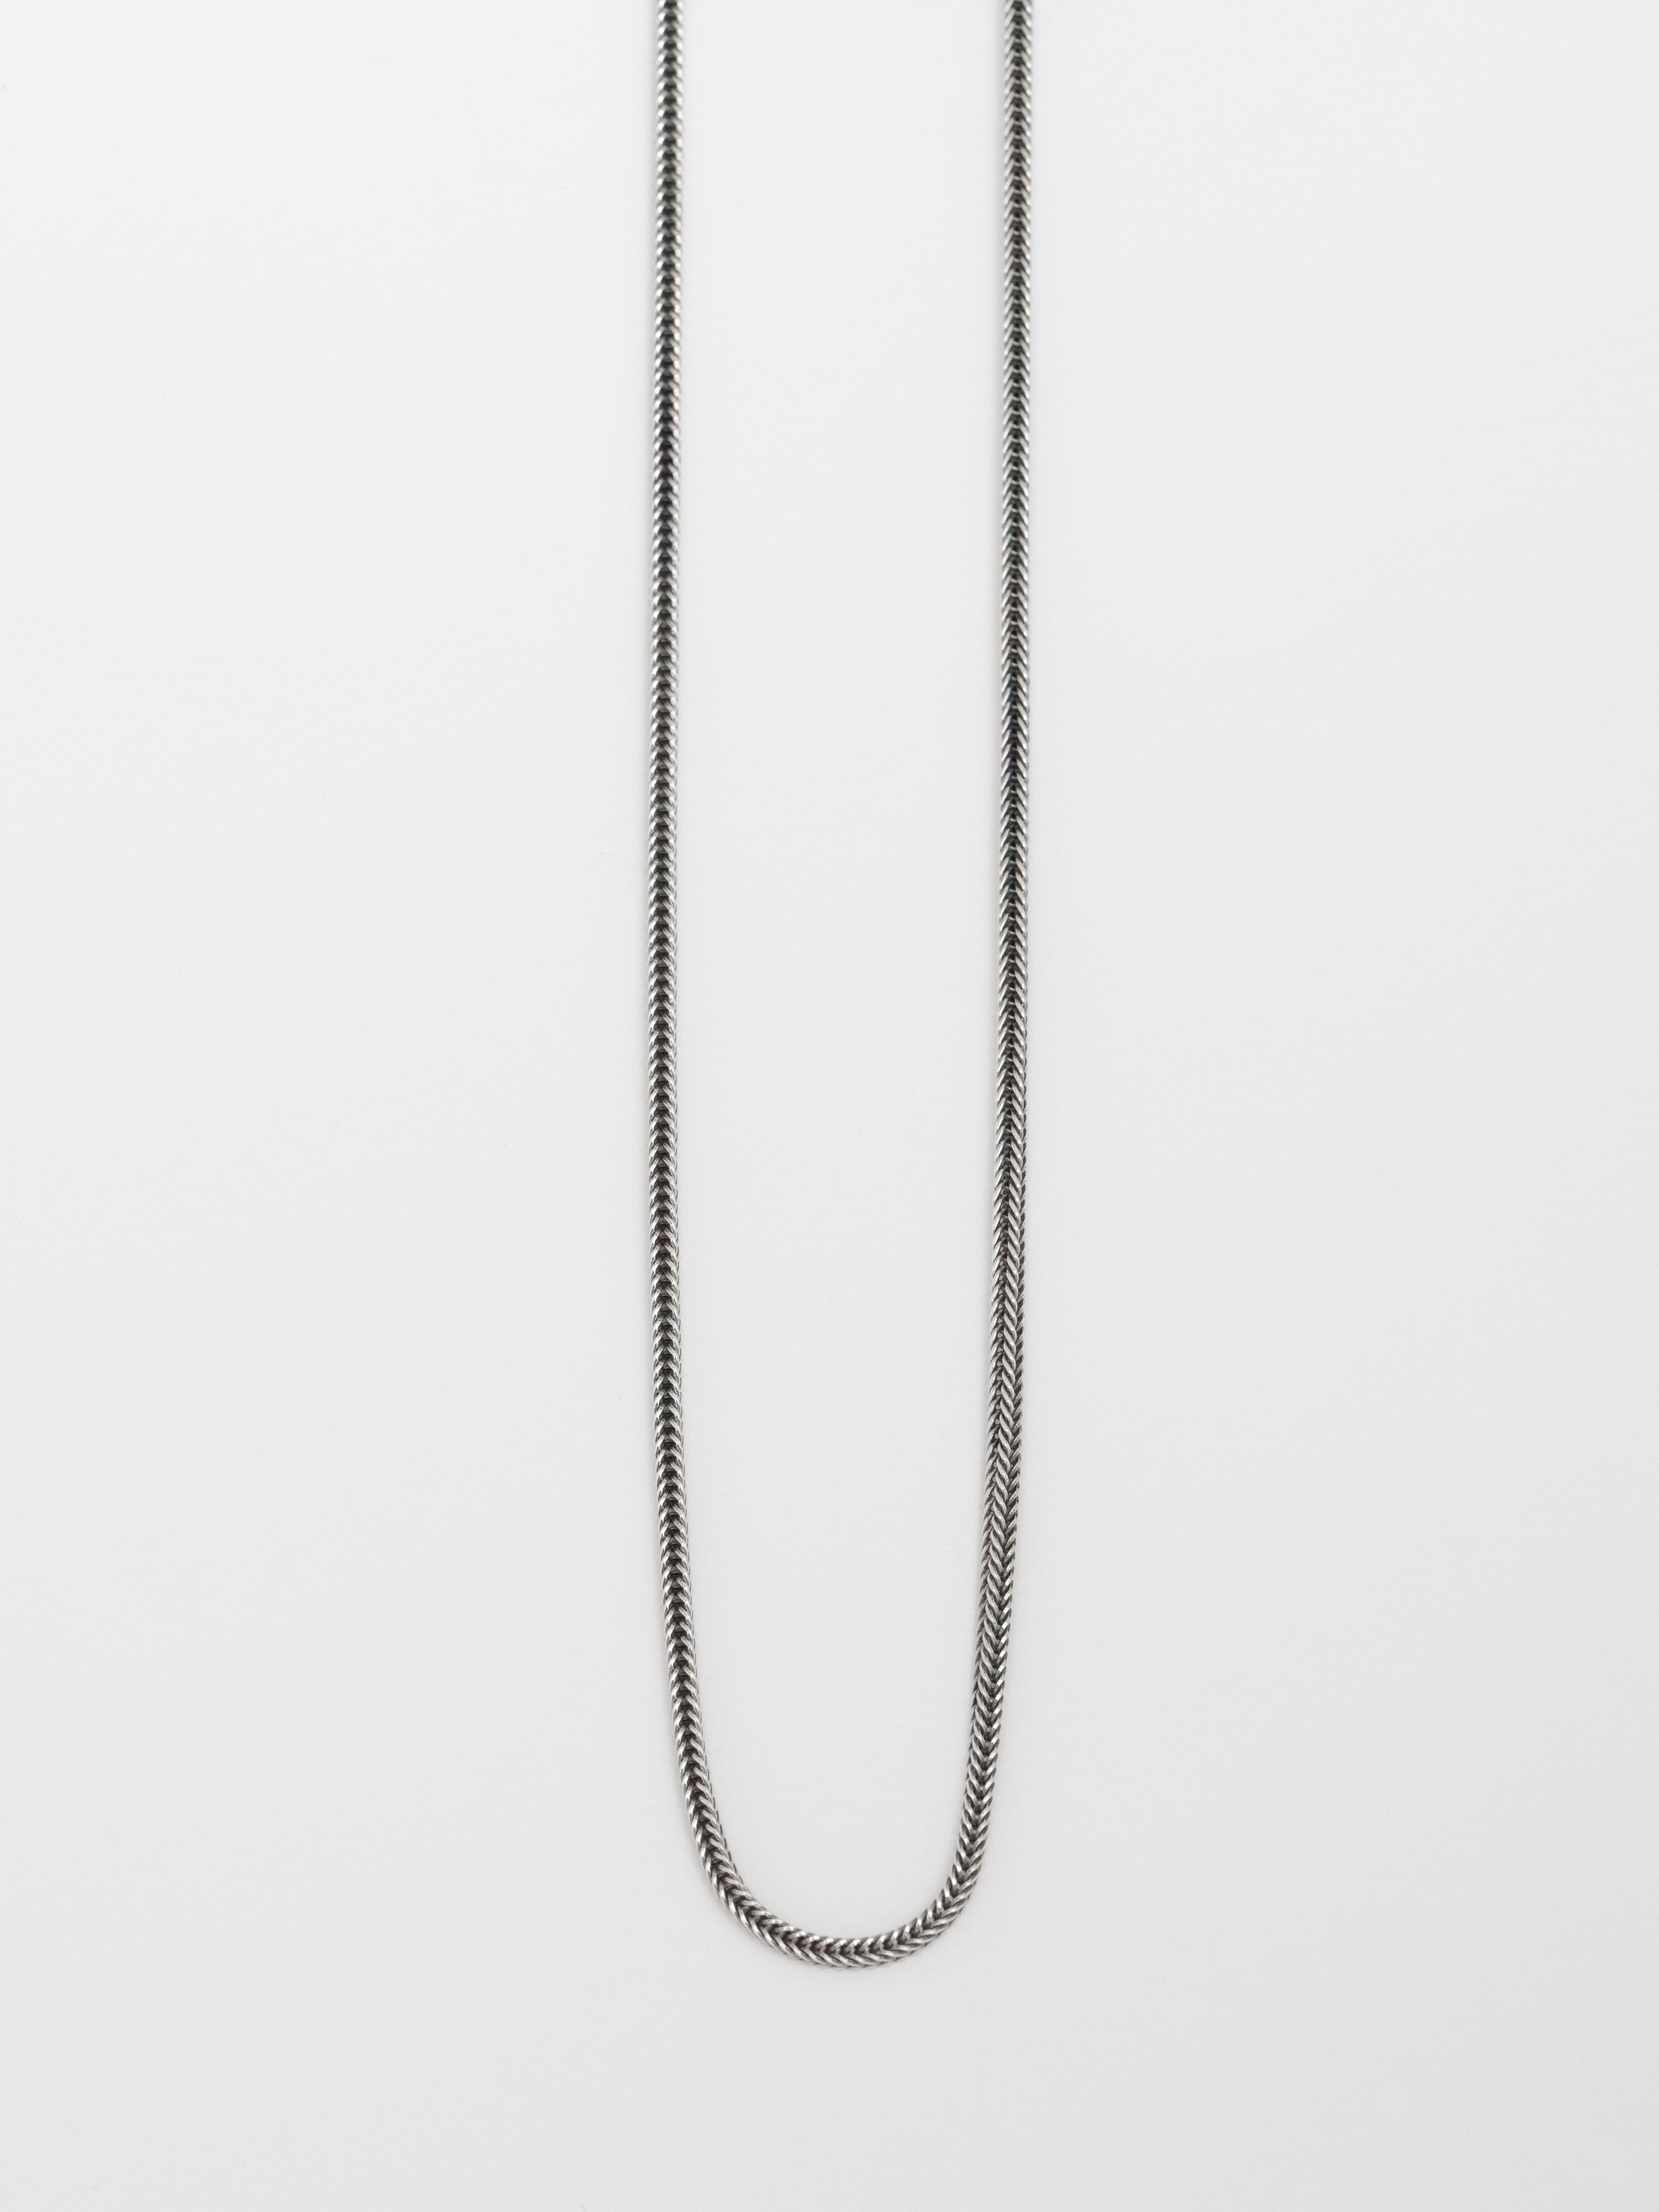 Foxtail Chain Necklace 40cm / Gerochristo